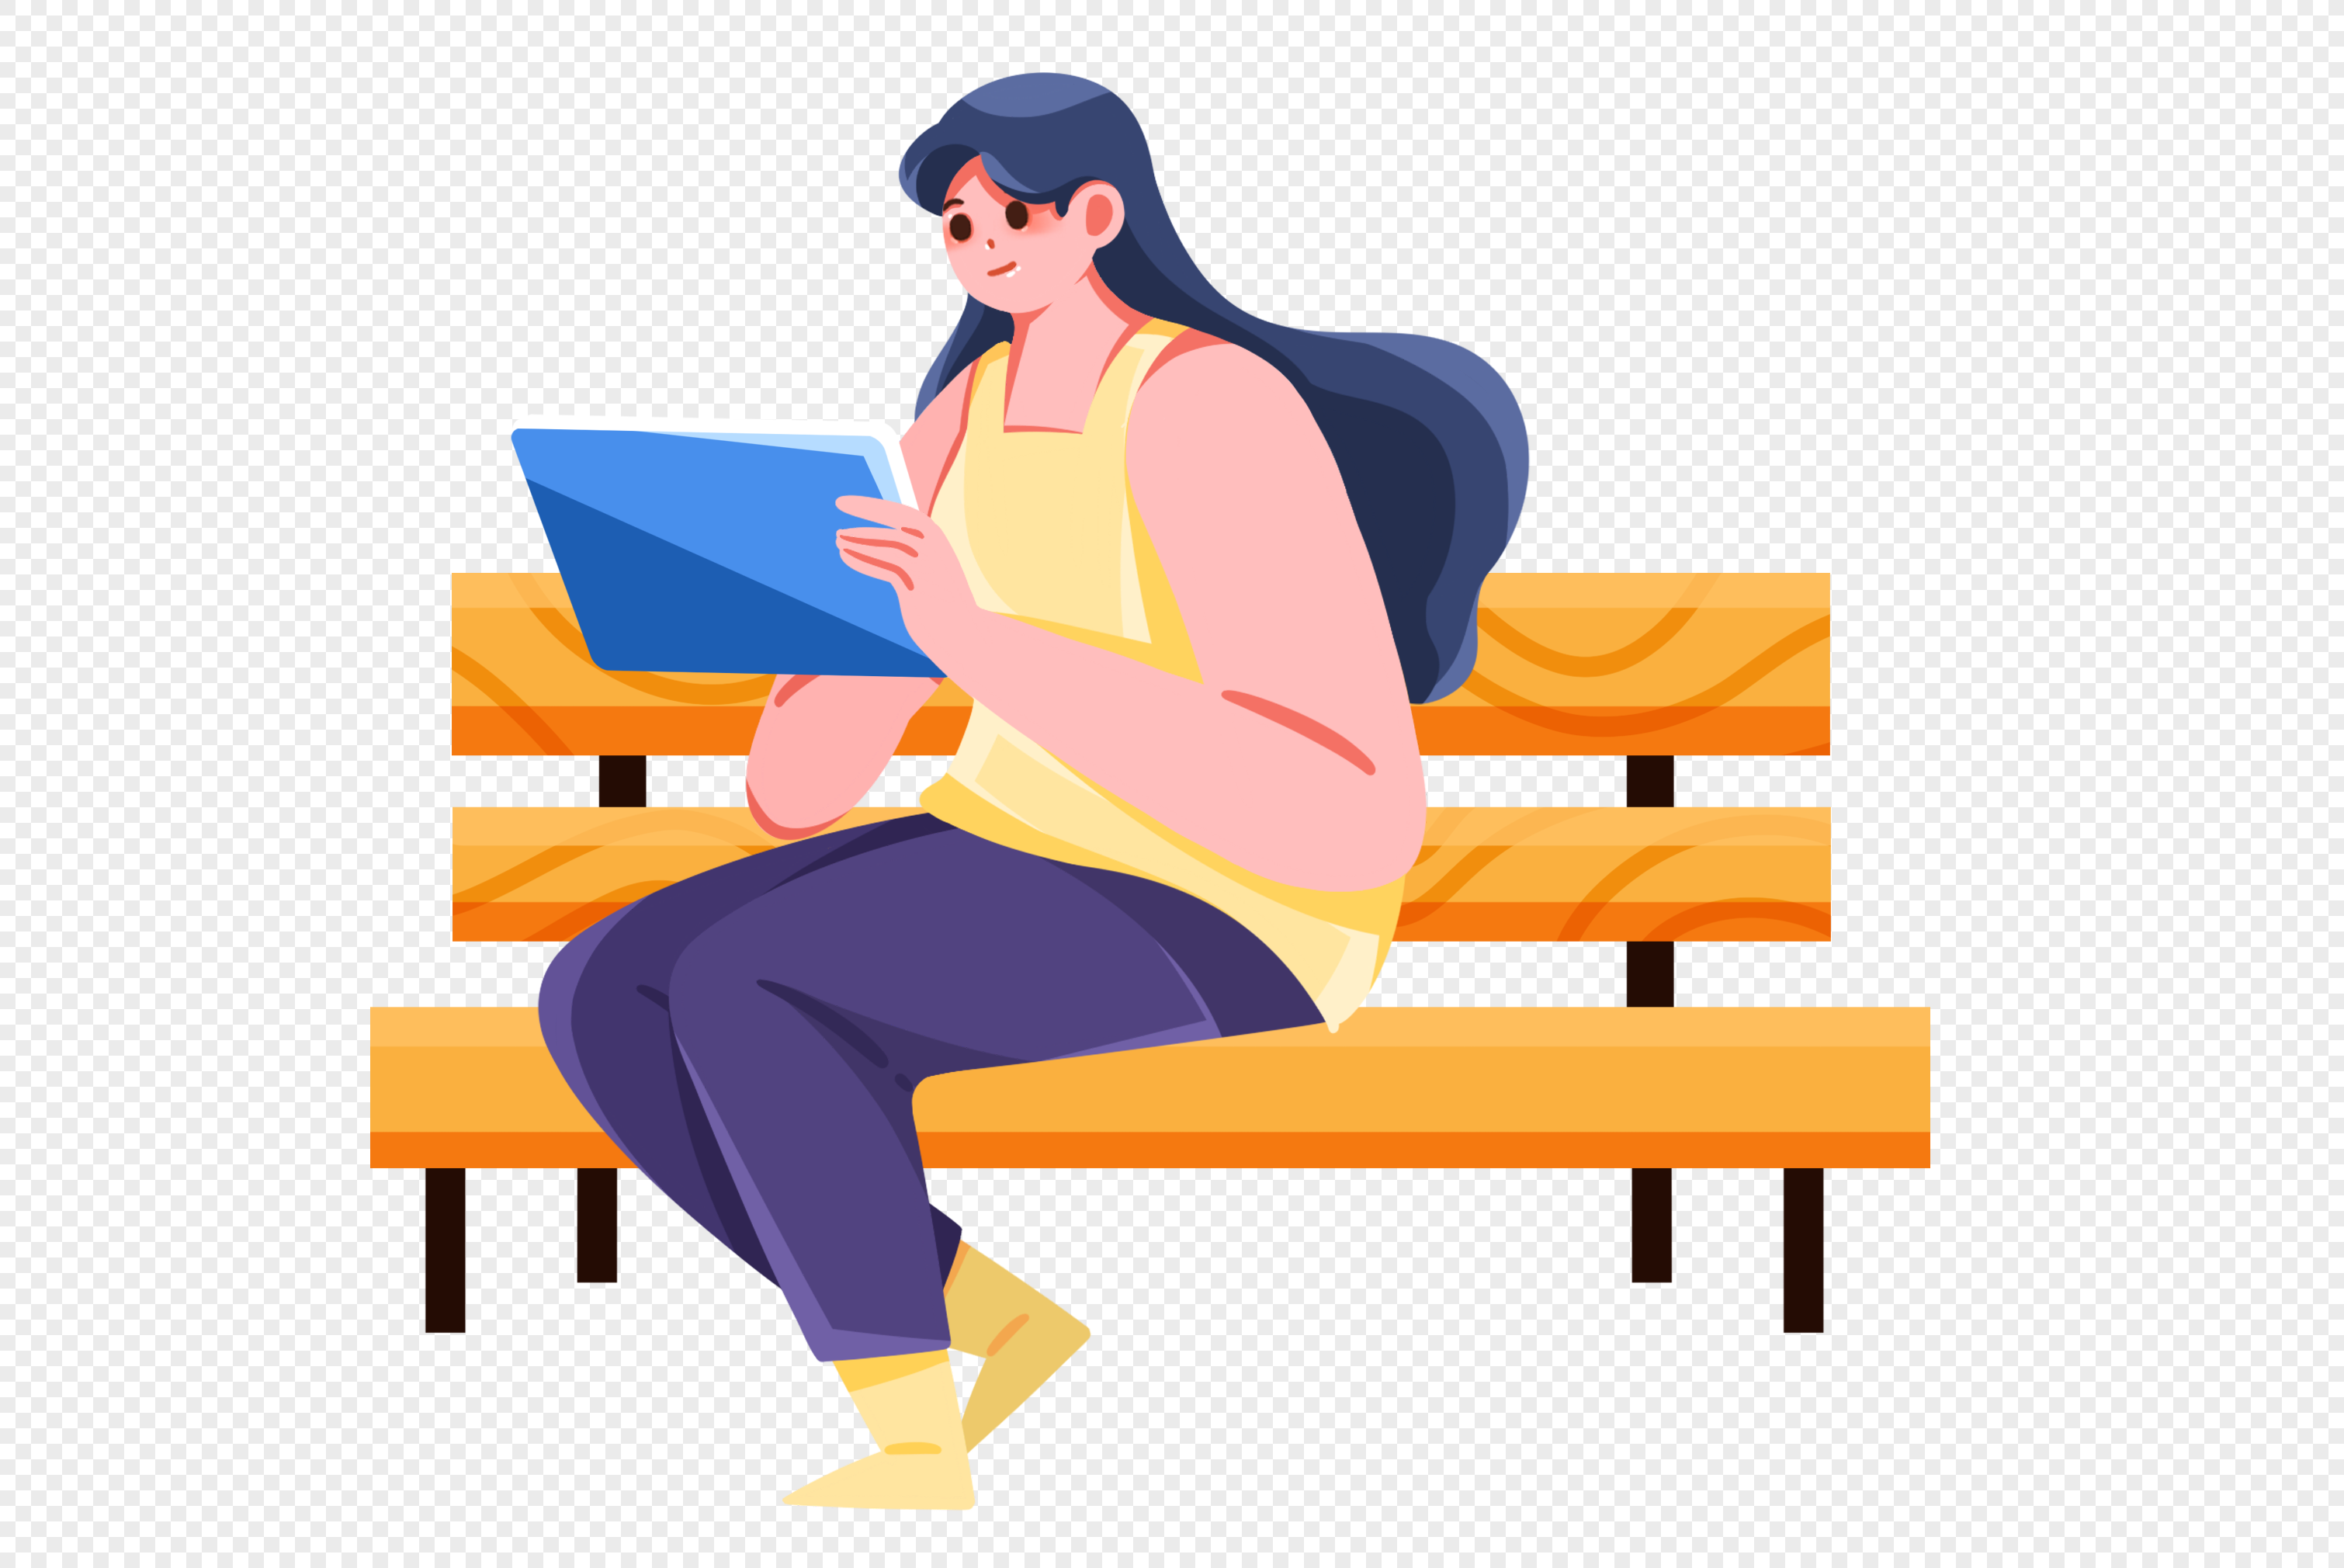 Girls Back, Dark Light, Sitting Woman, Girl Vector PNG Image And Clipart  Image For Free Download - Lovepik